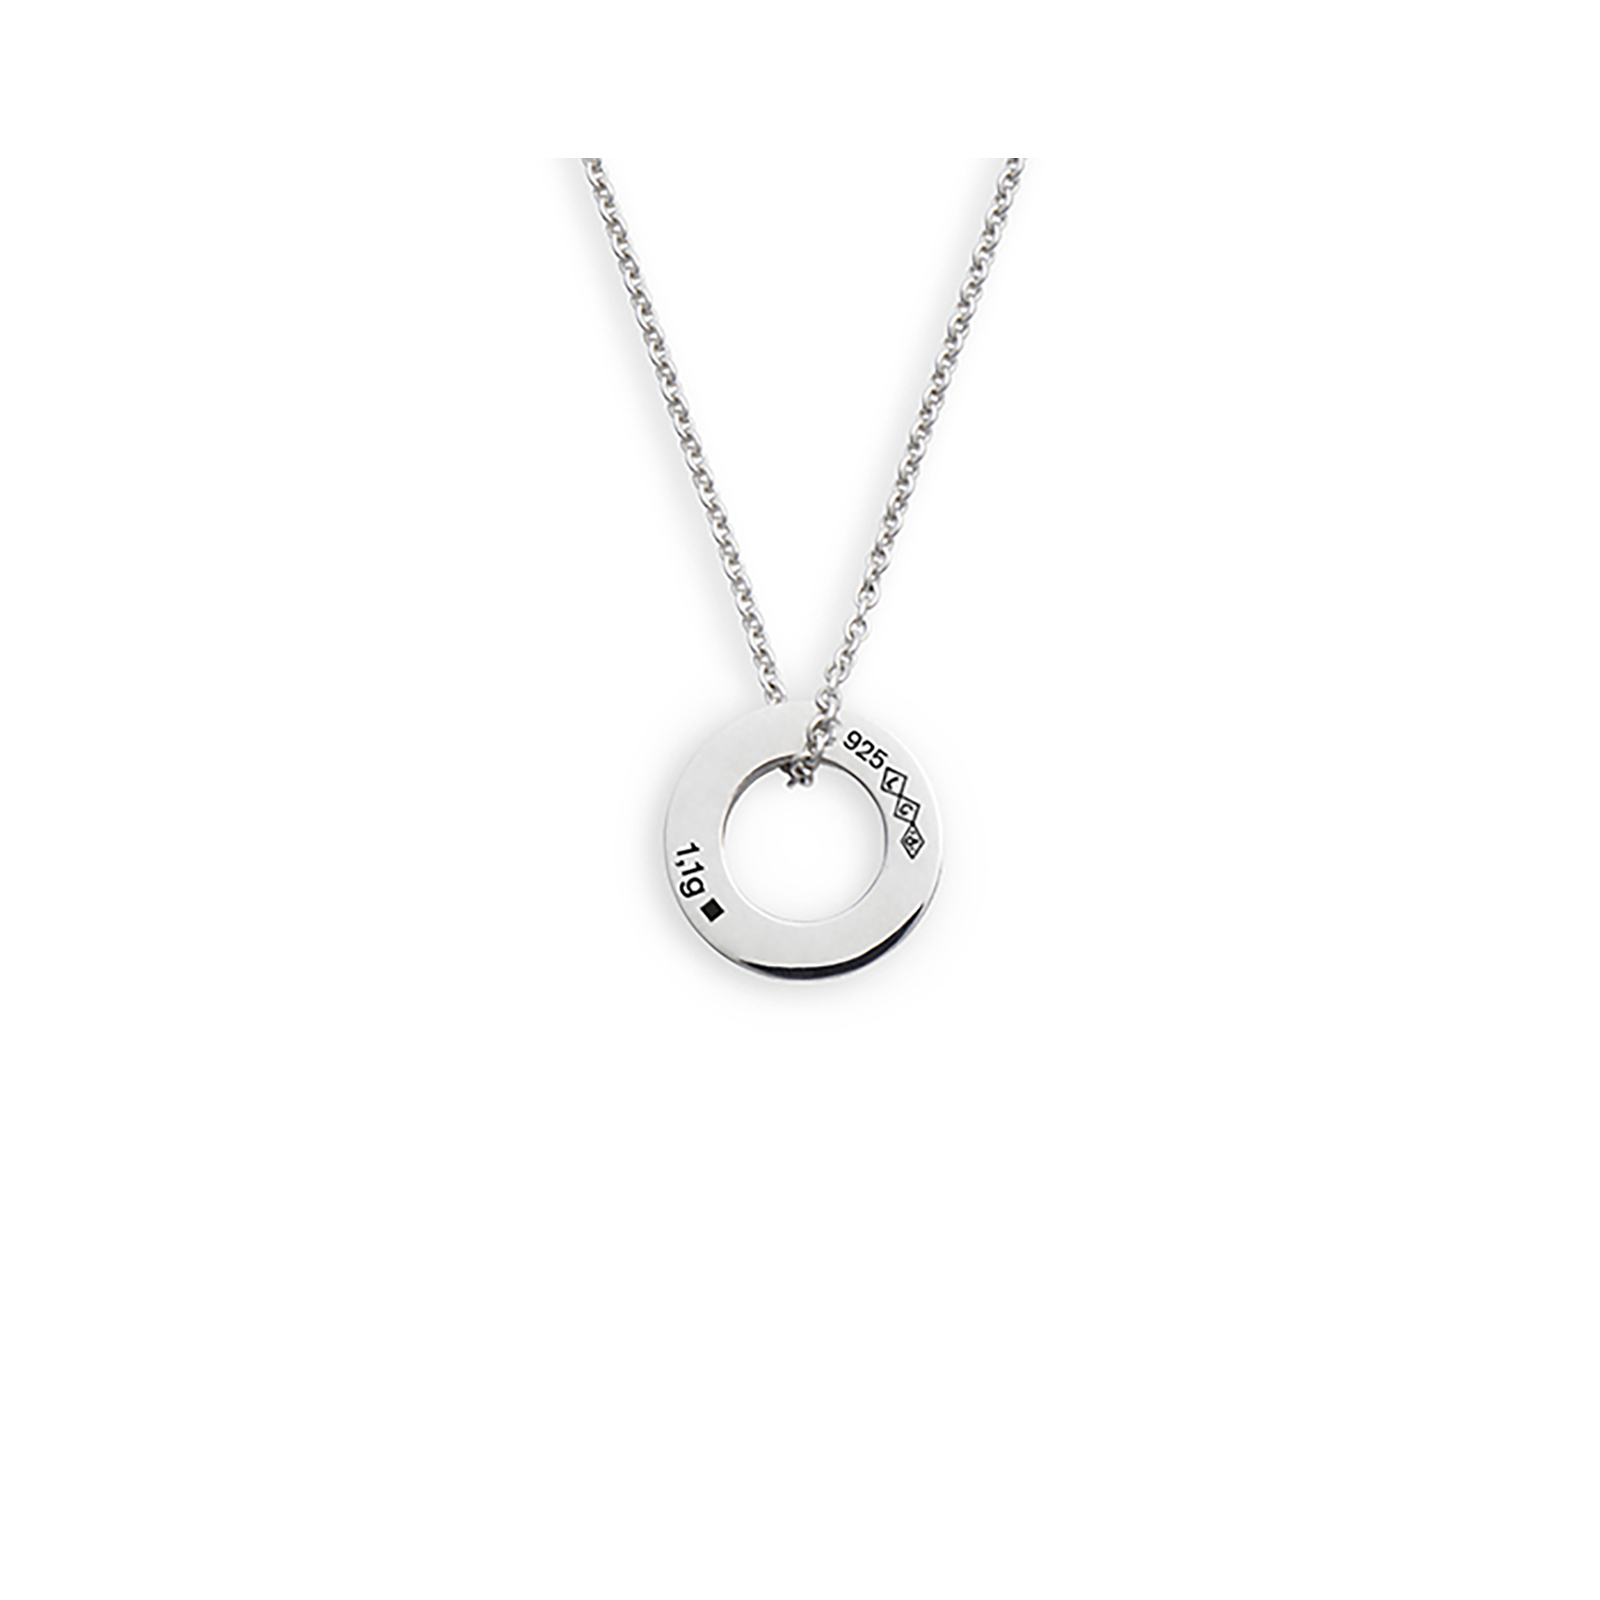 1,1g round pendant with a chain